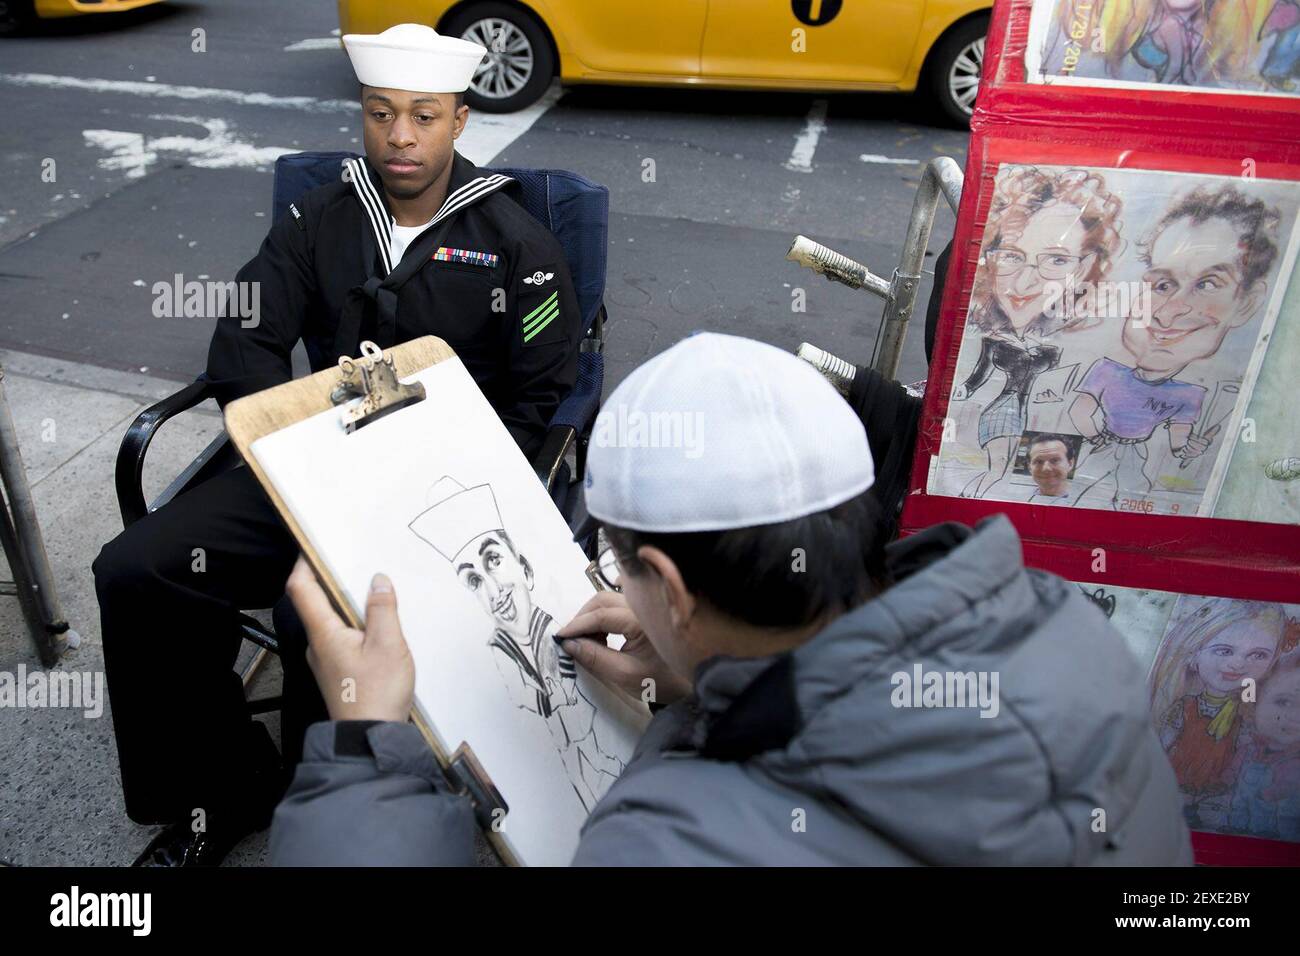 NEW YORK (Nov. 9, 2015) USS New York (LPD 21) Sailor Airman Aaron Waters gets a caricature drawn while visiting New York Cityâ€™s Times Square. New York is participating in Veterans Week New York City to honor the service of all our nationâ€™s veterans. The ship conducted training certification during its transit from its homeport in Mayport, Fla. (Photo by Mass Communication Specialist 1st Class Brian McNeal/U.S. Navy) *** Please Use Credit from Credit Field *** Stock Photo